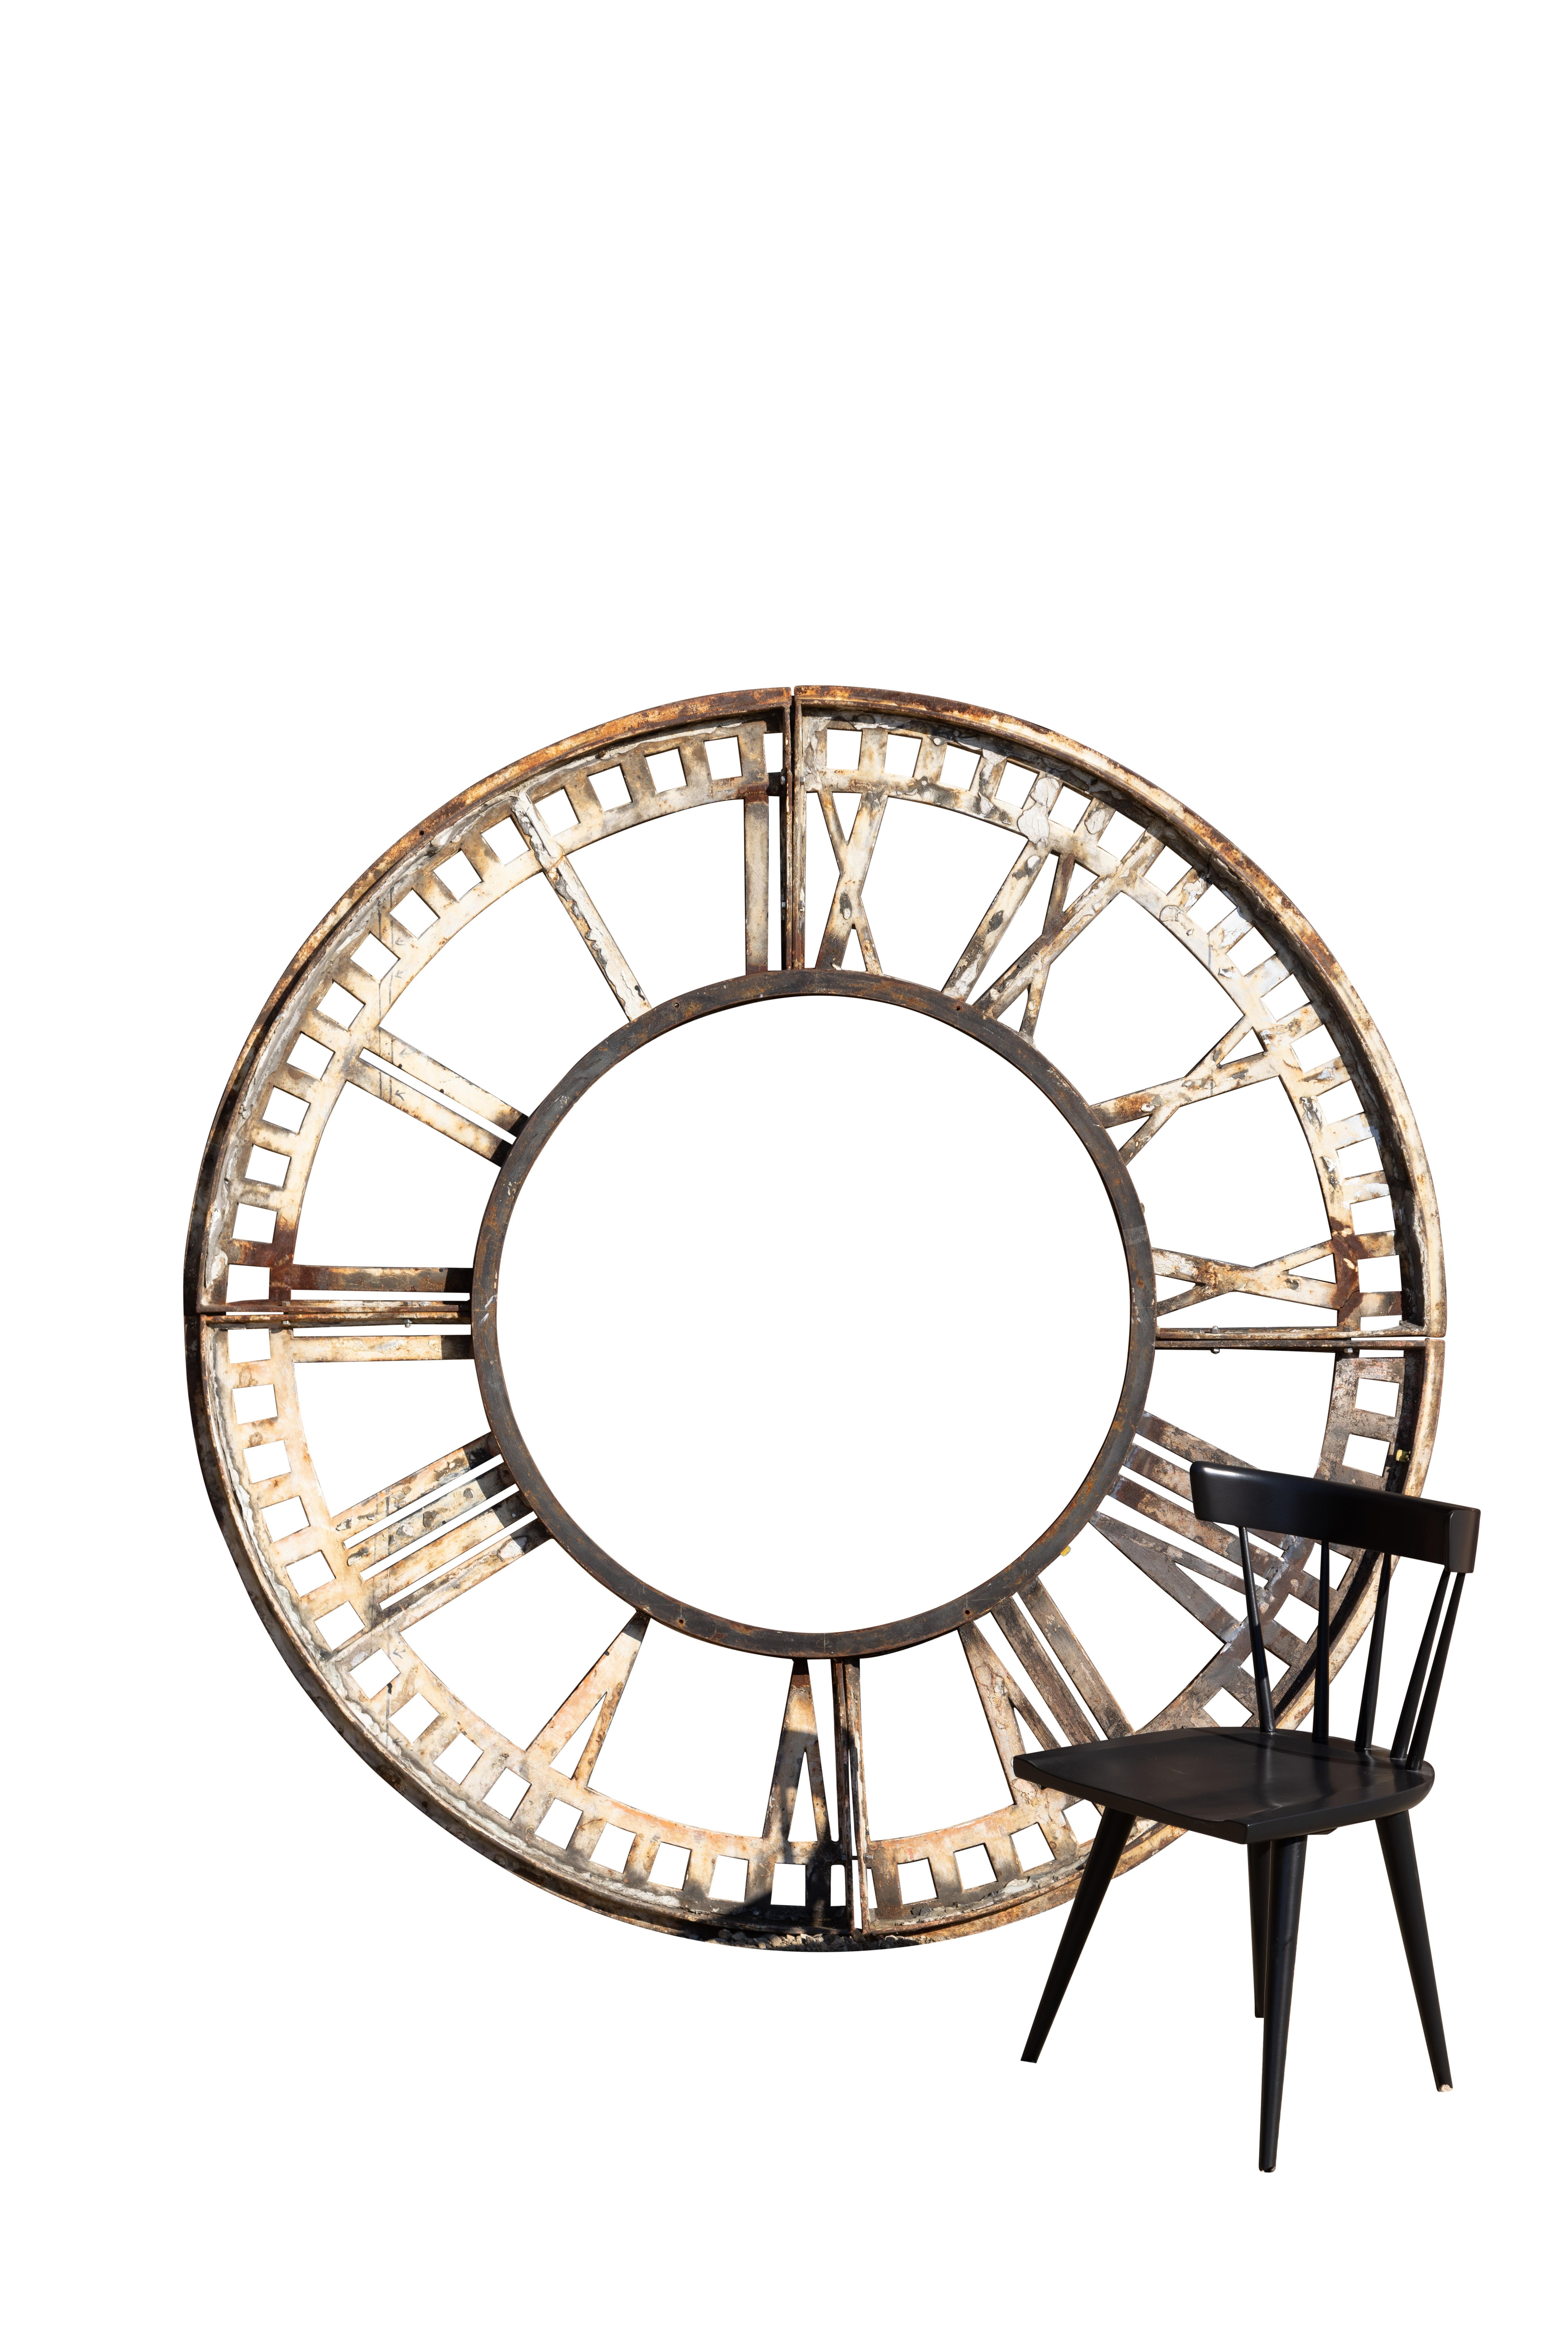 Beaux Arts Clock Frame from Original Penn Station Building in NYC, 6-ft diameter, c 1910 For Sale